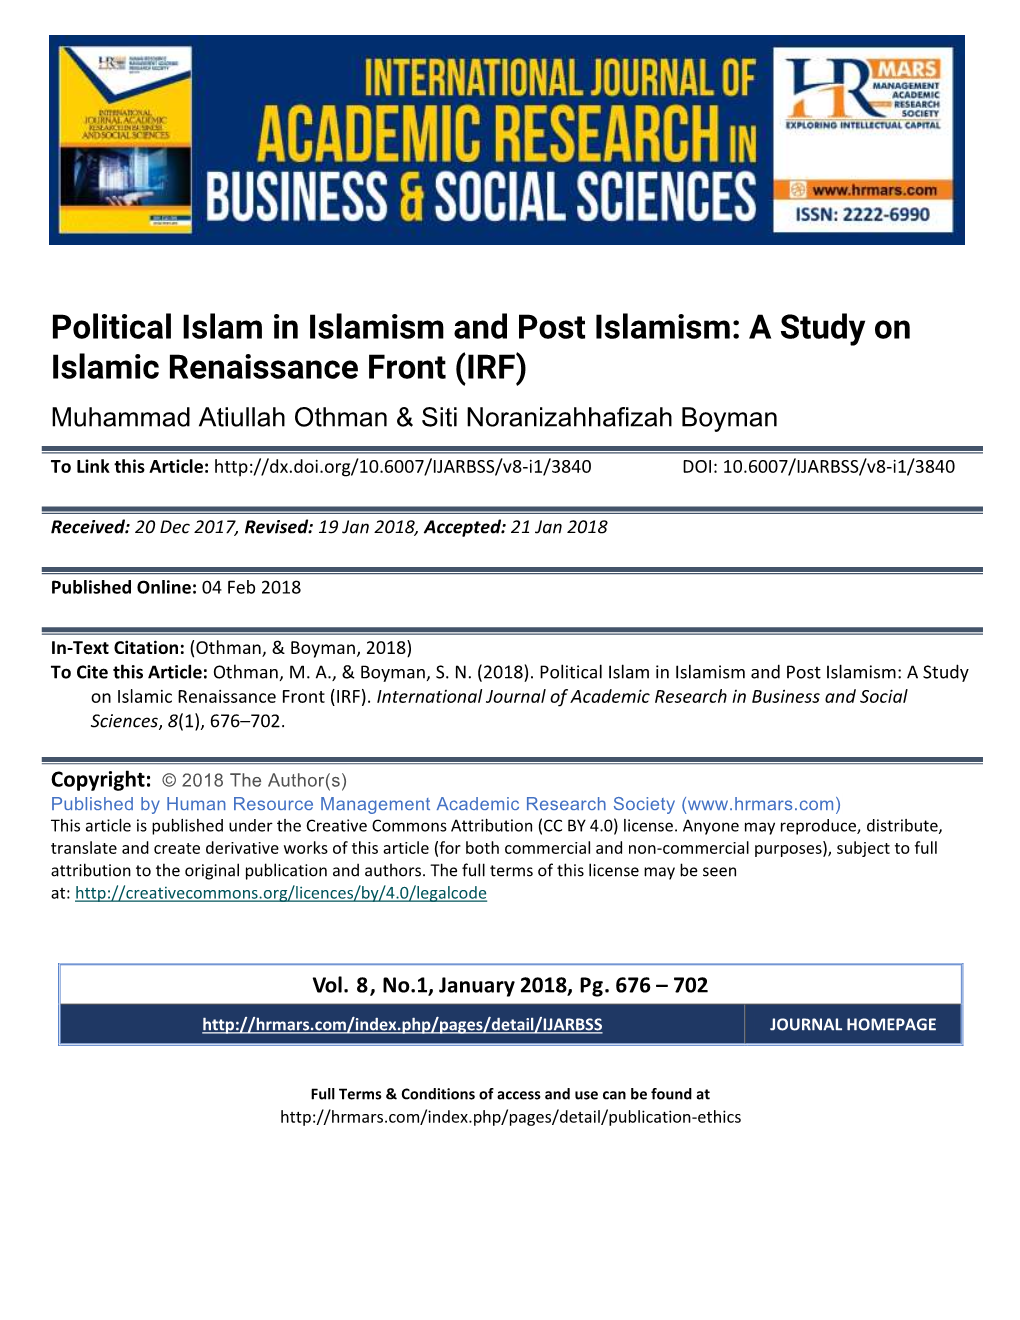 Political Islam in Islamism and Post Islamism: a Study on Islamic Renaissance Front (IRF)